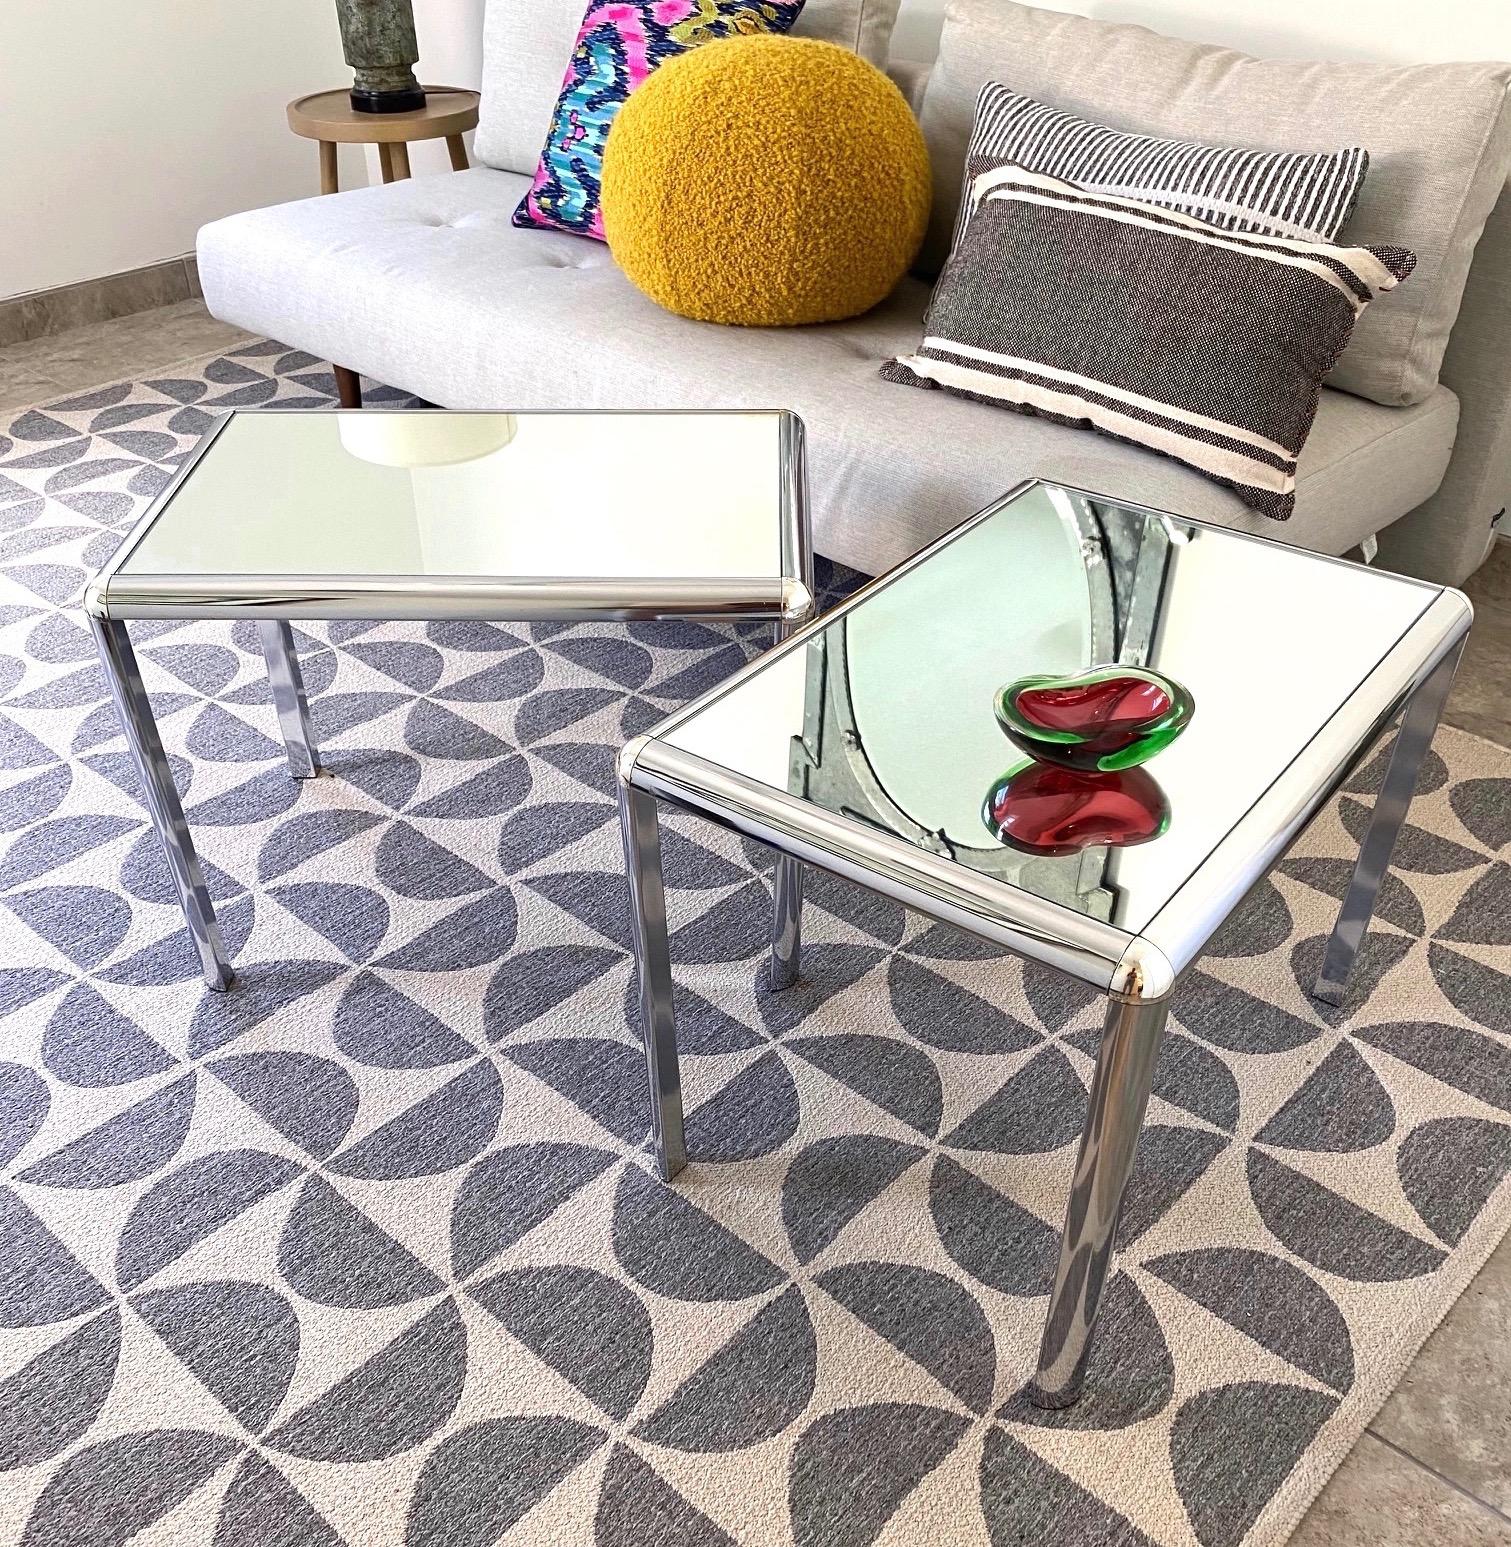 Pair of Mid-Century Modern side tables with chic minimalist frames in polished chrome. The vintage tables have a rectangular form with rounded corners and have three sided legs also with rounded fronts. The reflective frames are fitted with mirrored